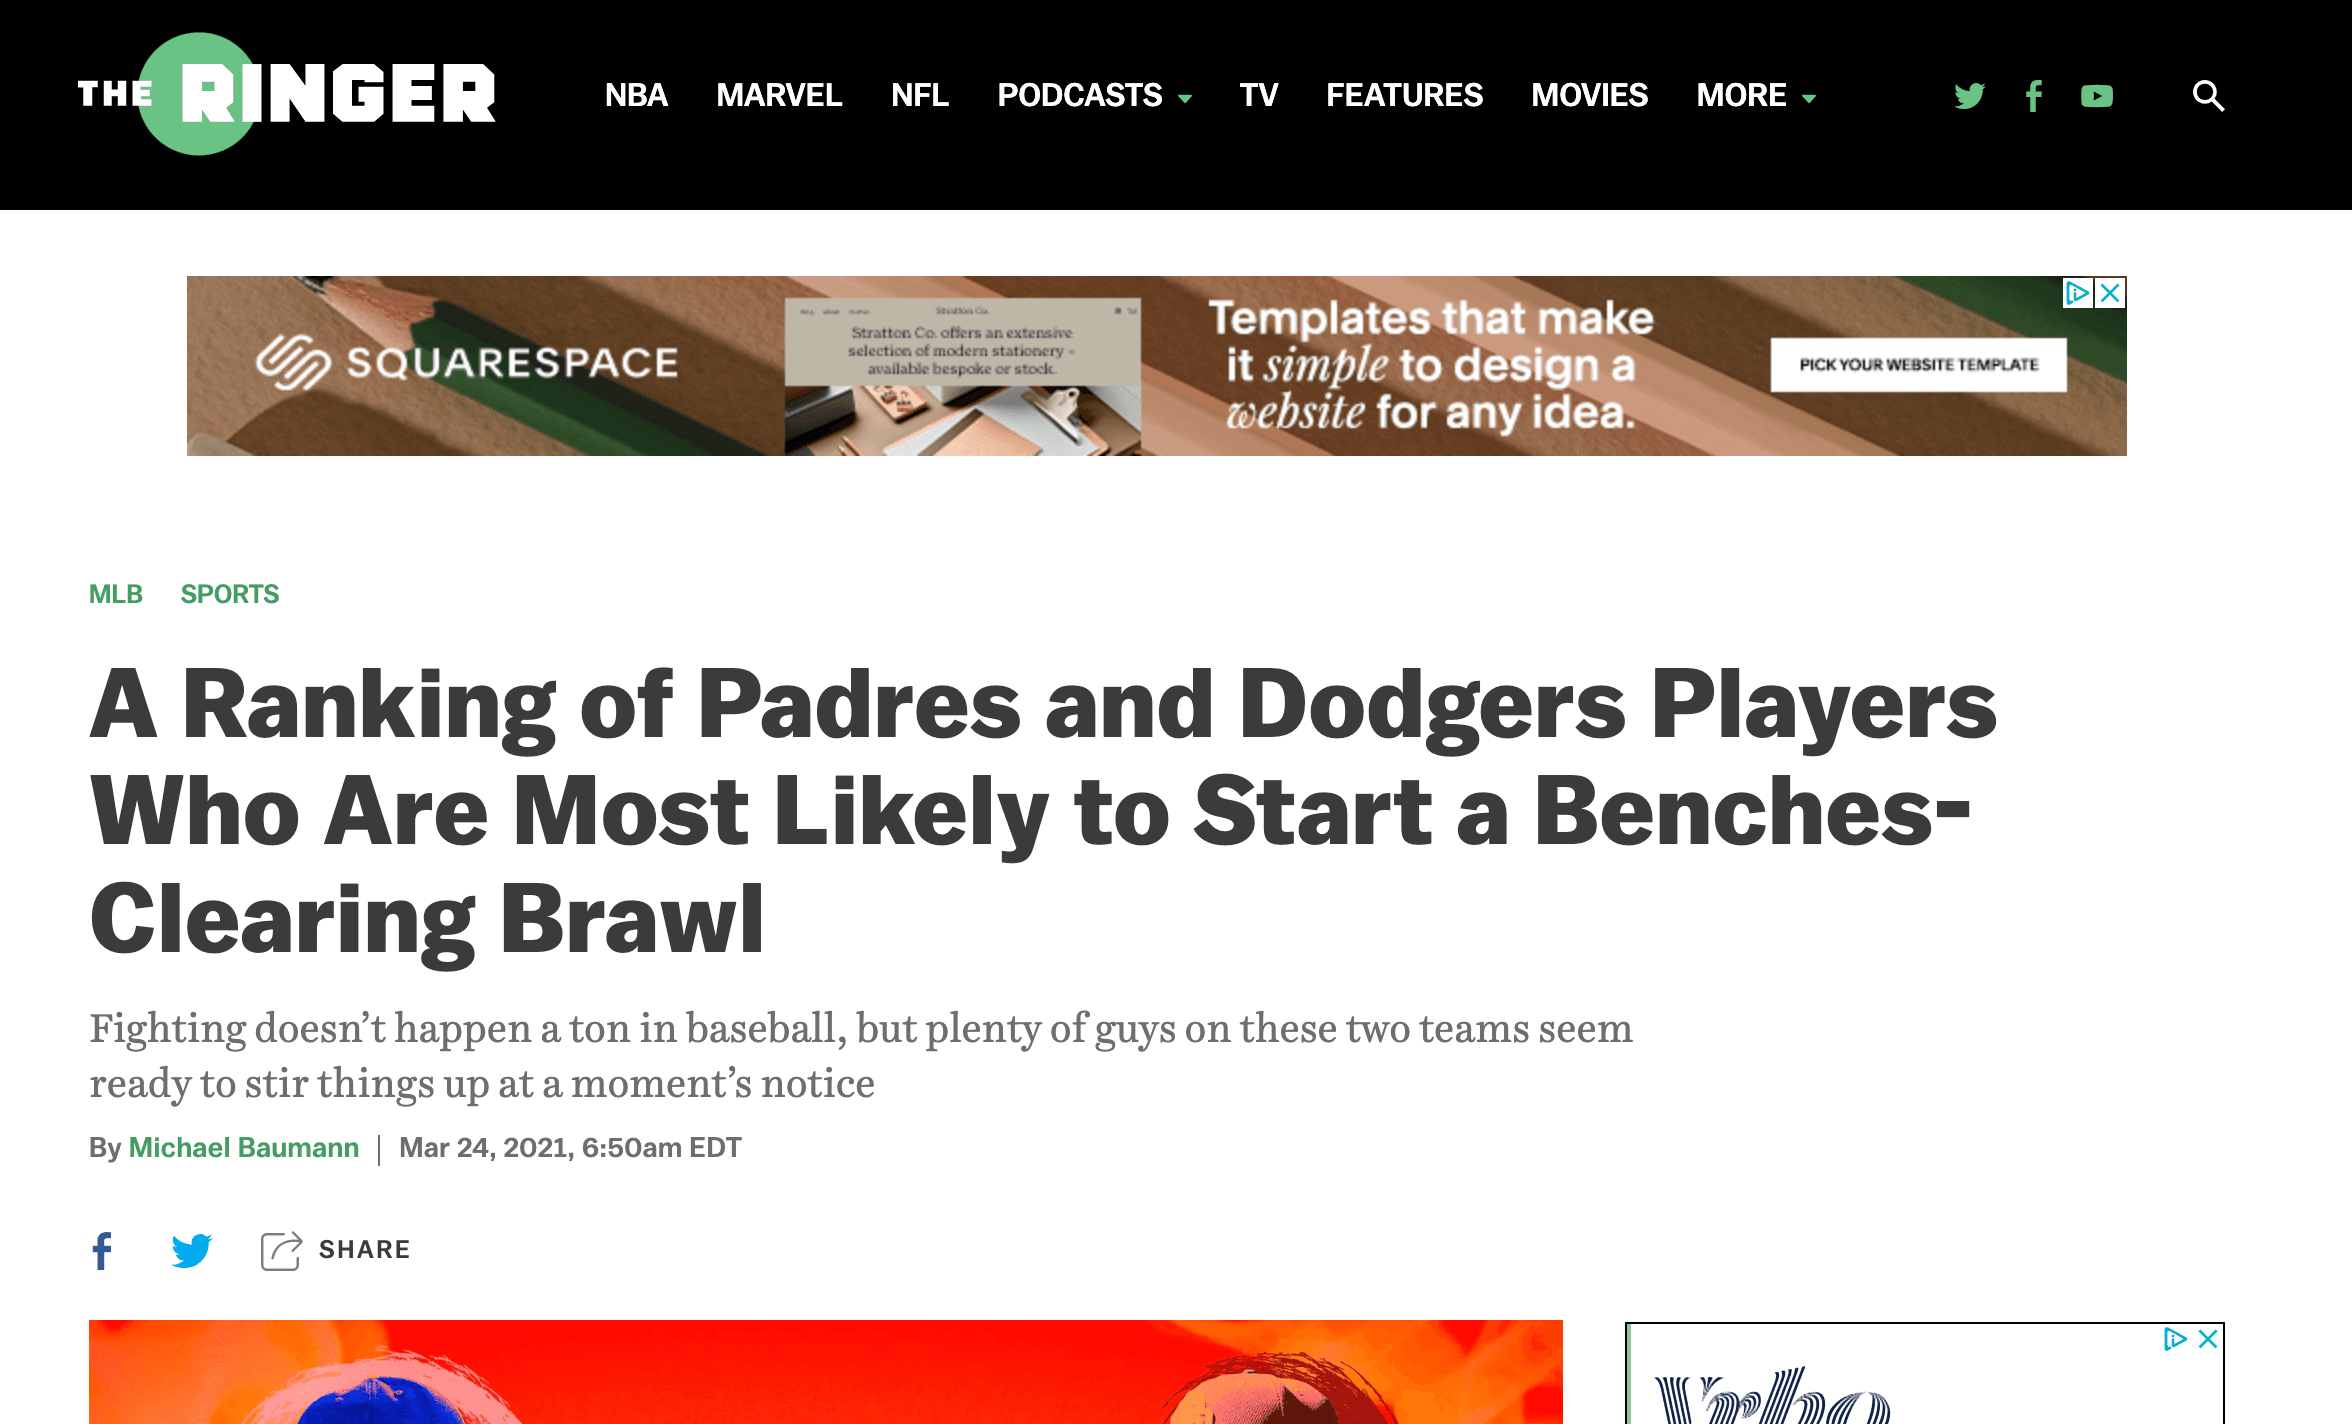 Example of an emotional headline from The Ringer